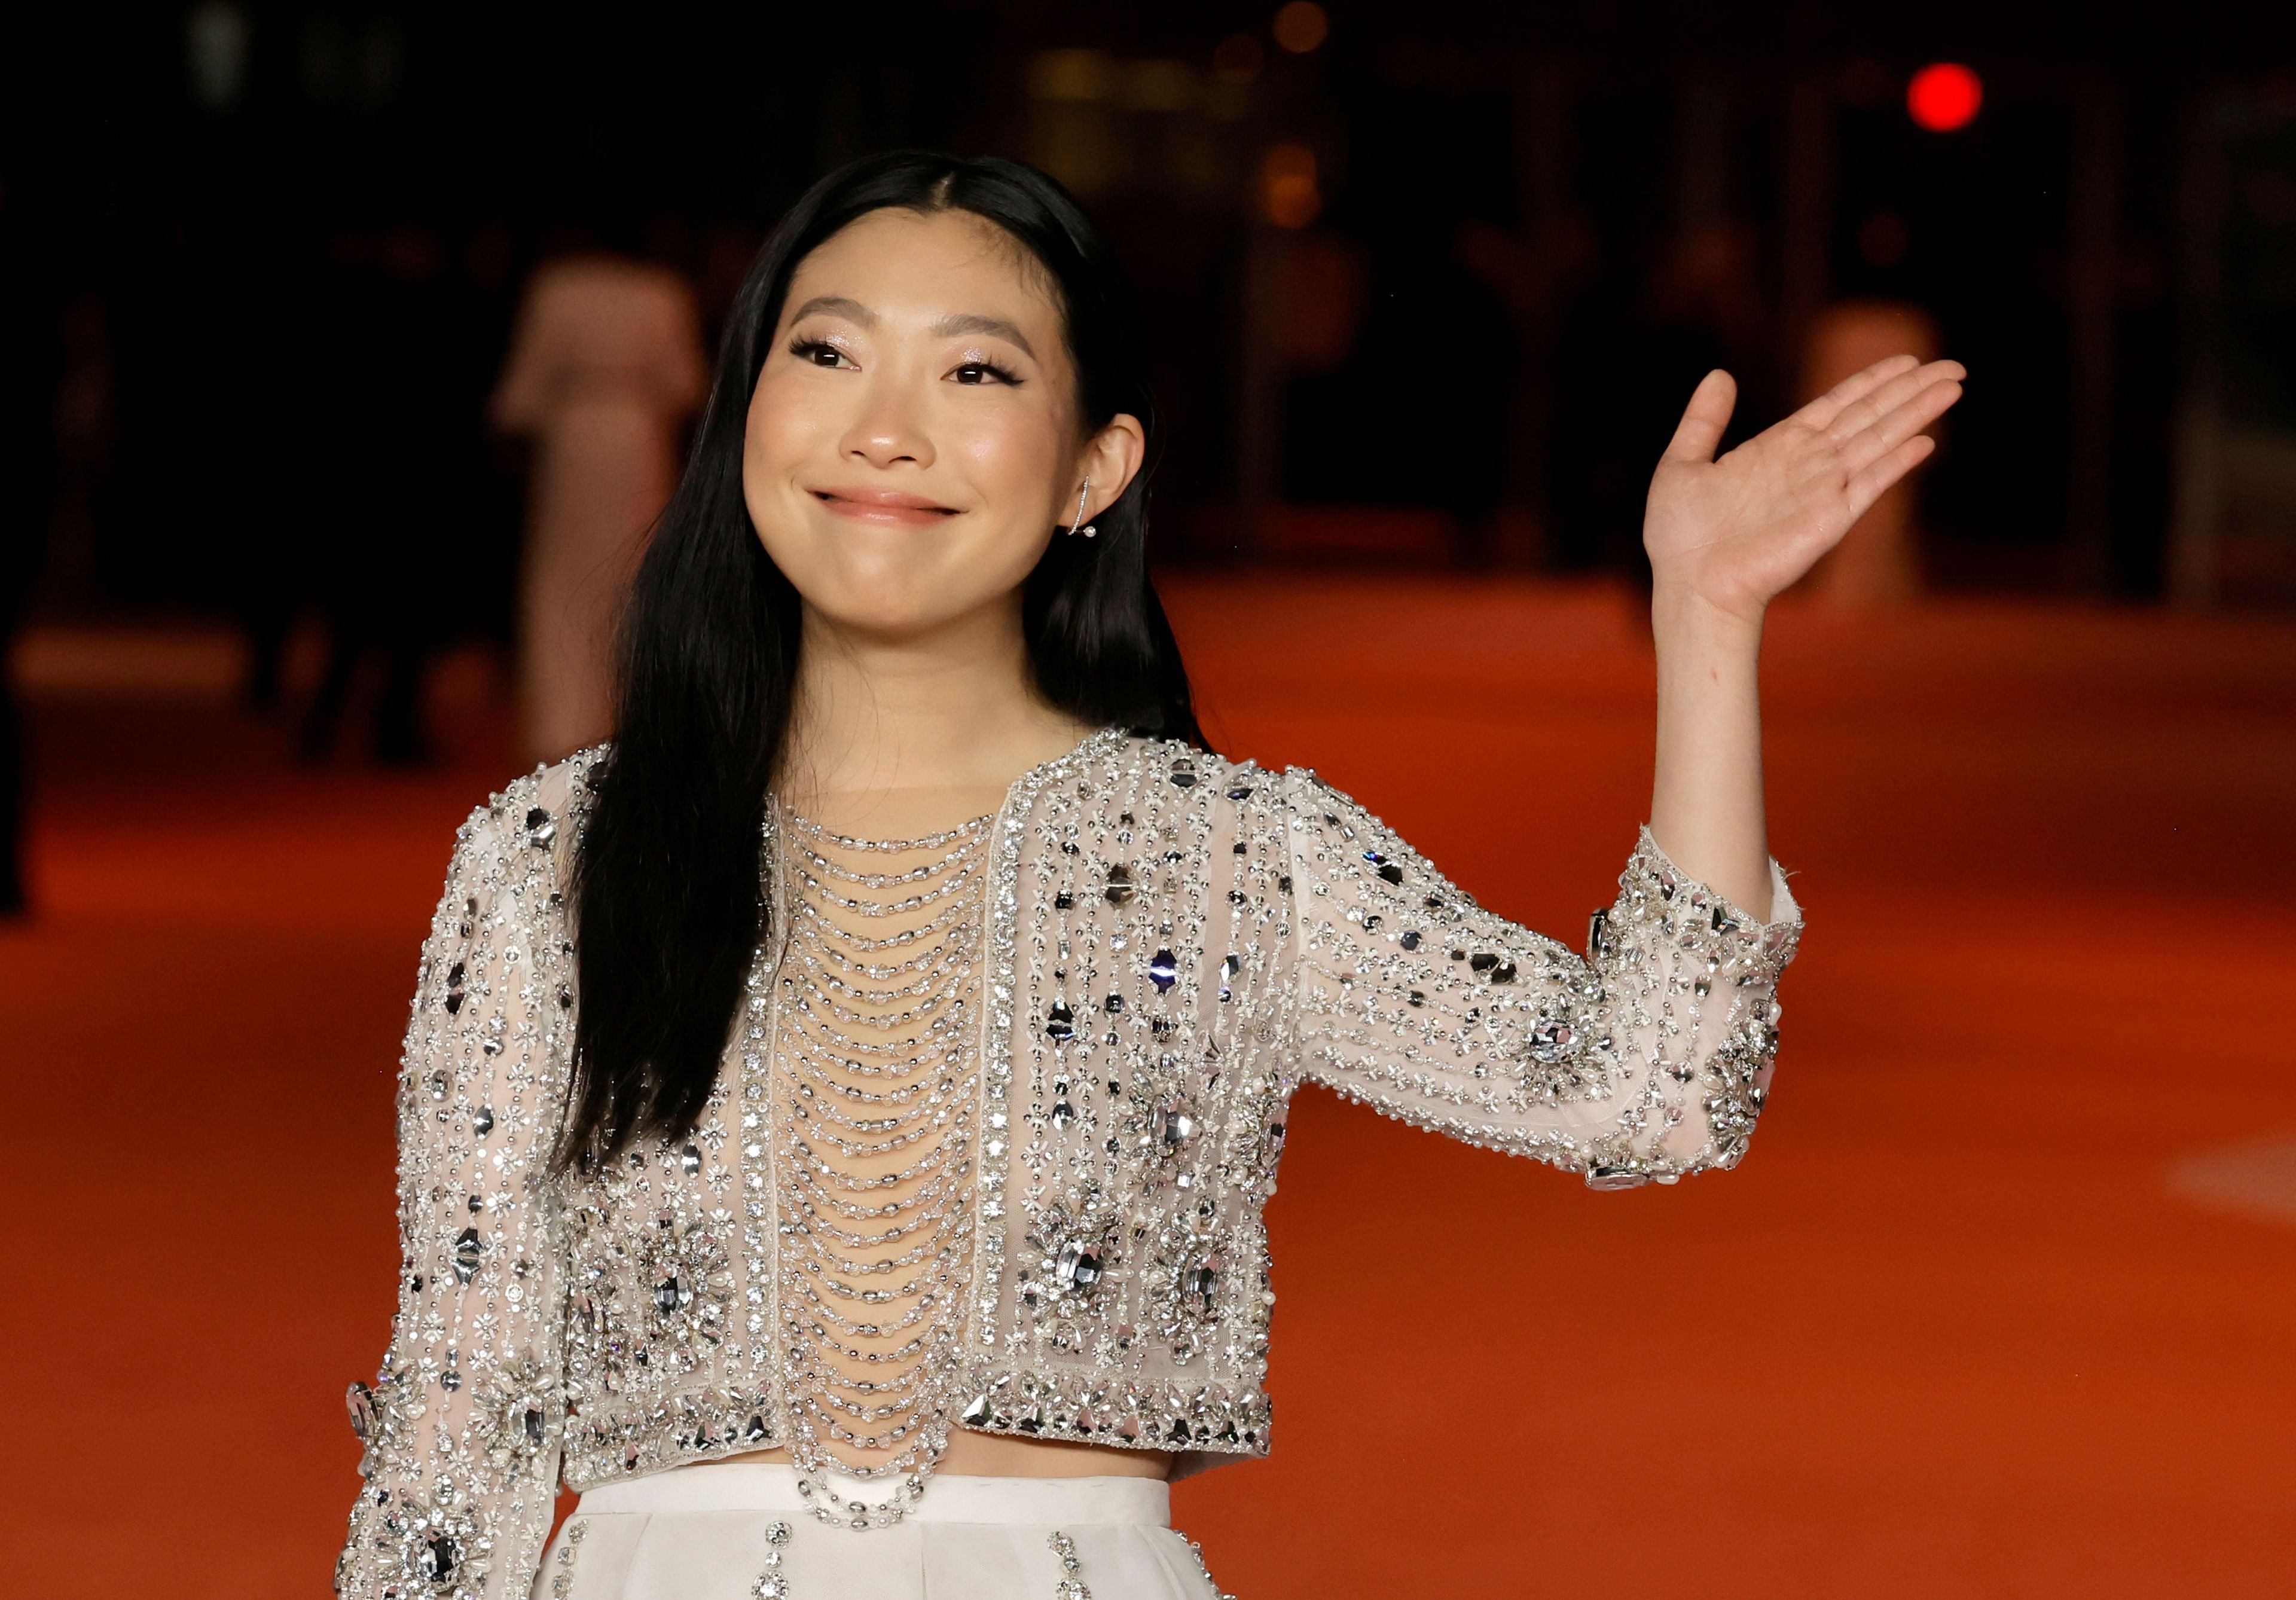 Woman waving hand on red carpet event